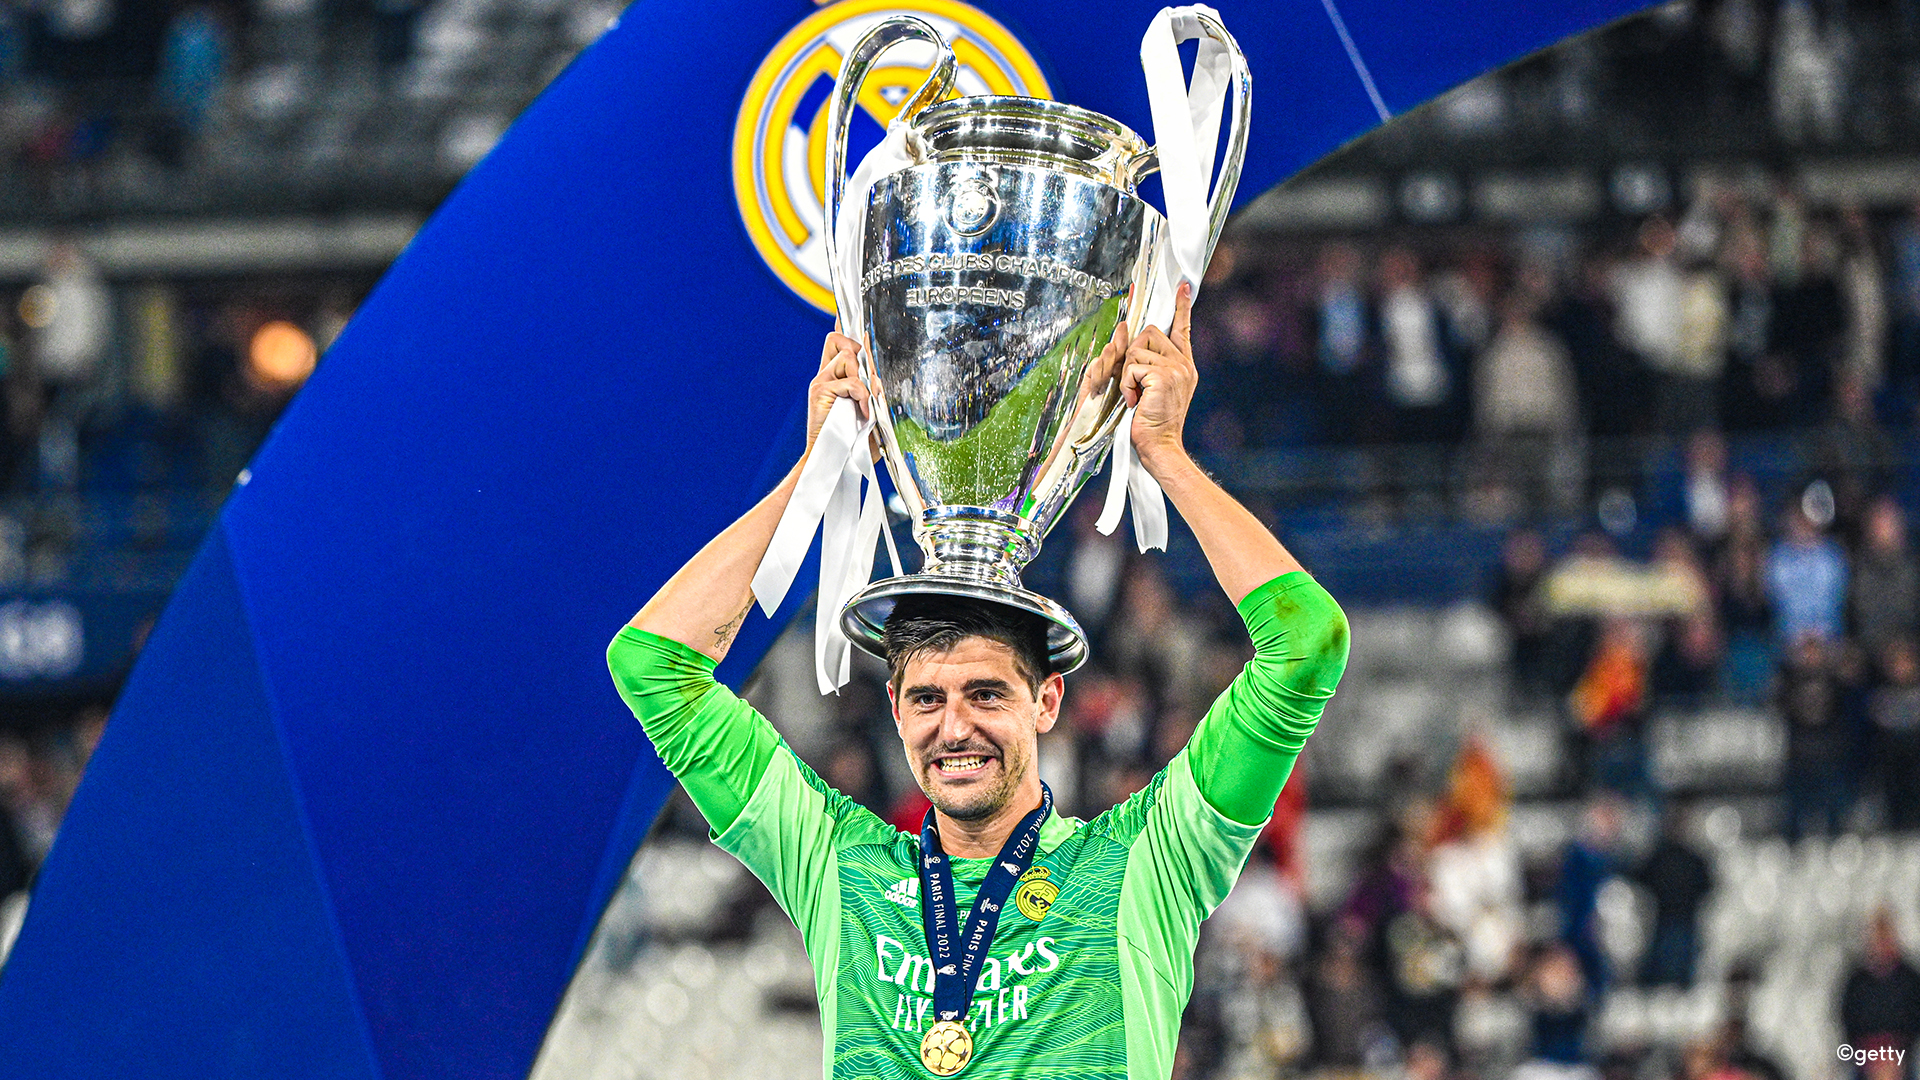 Unbeatable Thibaut Courtois Gives Real Madrid The Champions League With A Performance Of His Dreams. UEFA Champions League 2021 2022